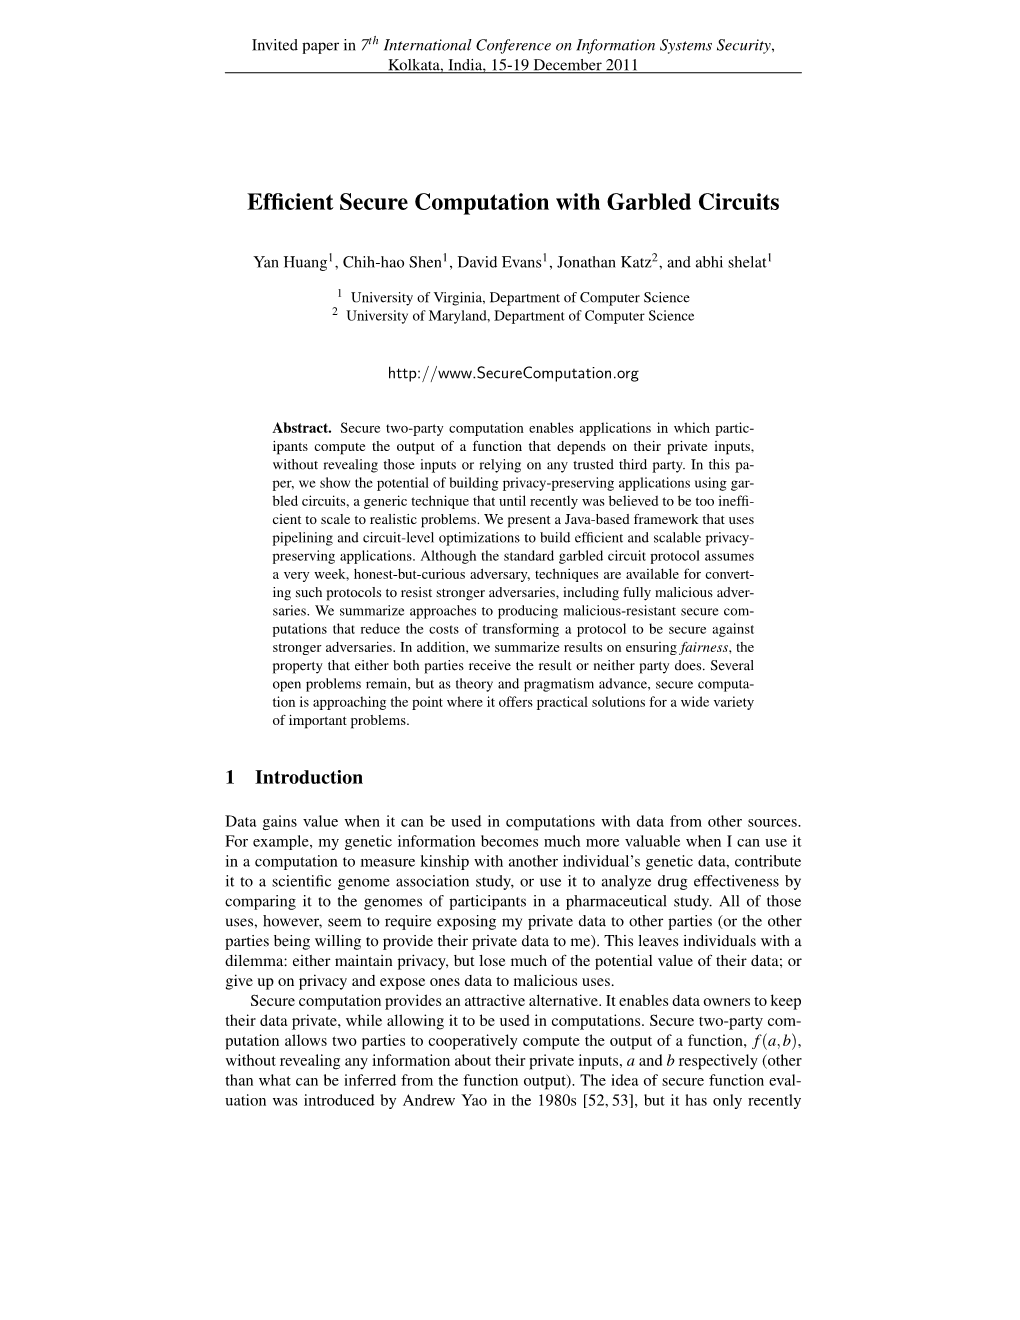 Efficient Secure Computation with Garbled Circuits